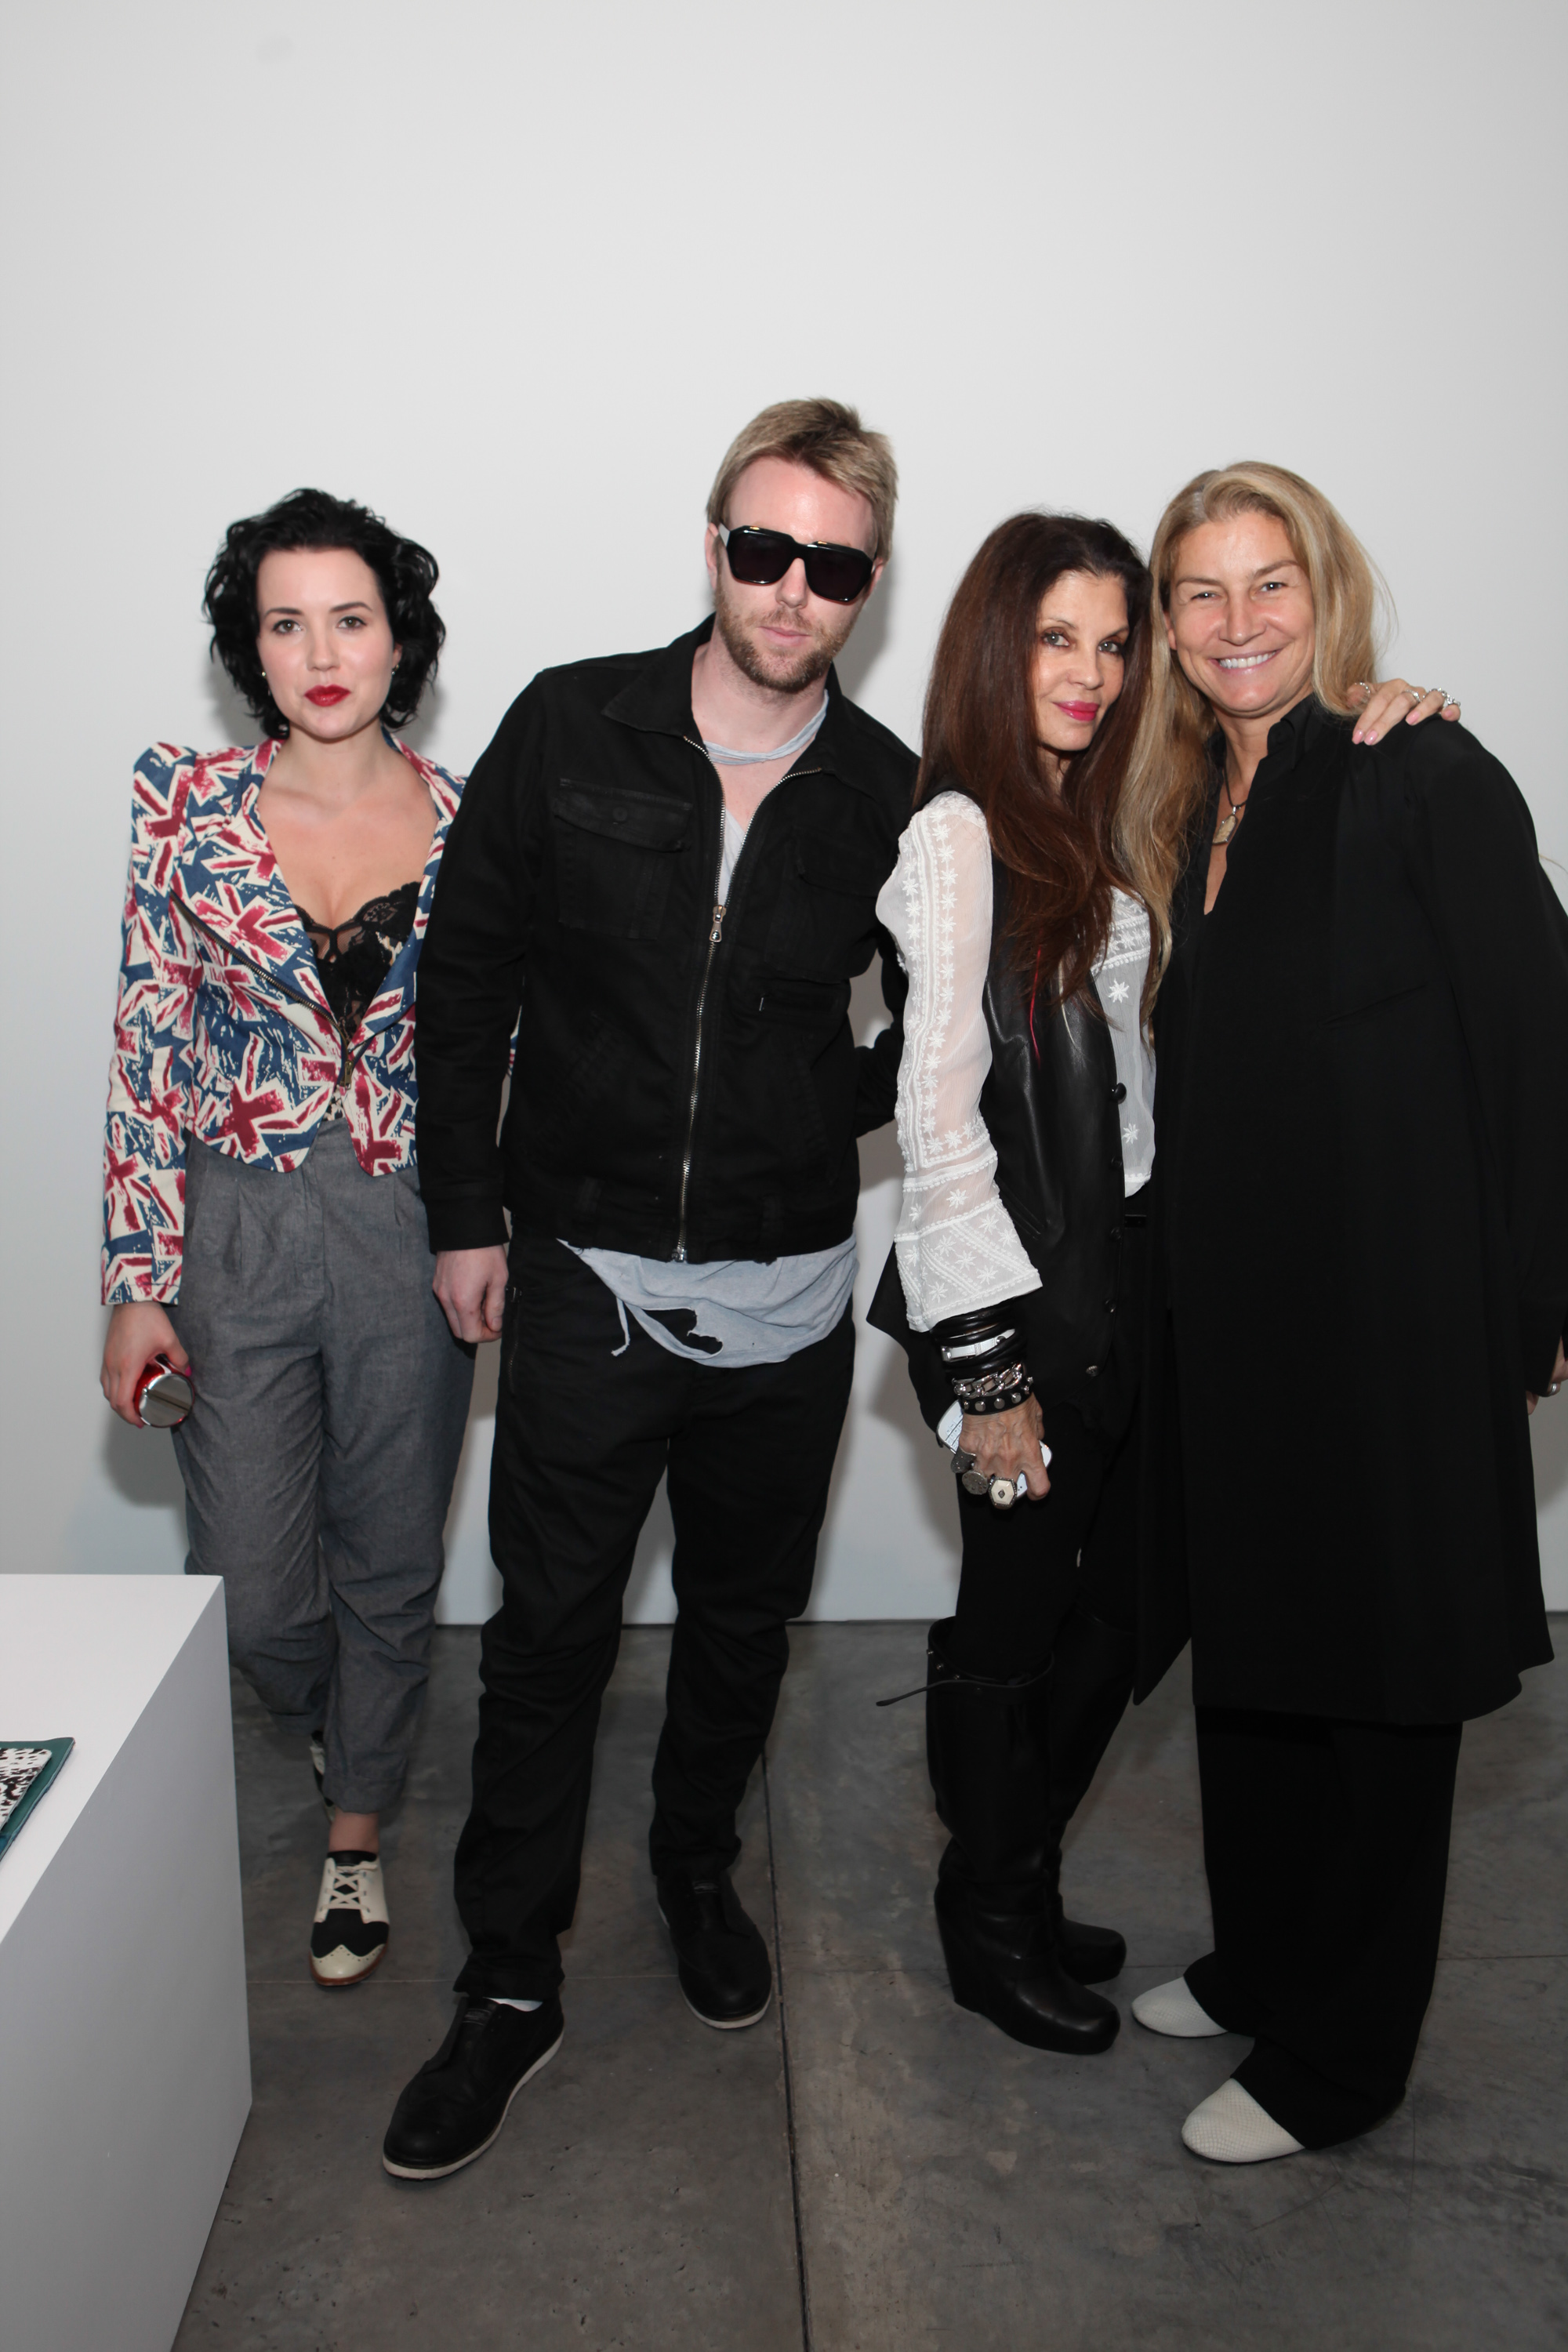 Angie King, Elijah Blue, Loree Rodkin, and Monicka Hamssenteele attend the Newbark presentation during Mercedes-Benz Fashion Week Spring in New York City, on September 10, 2013. | Source: Getty Images